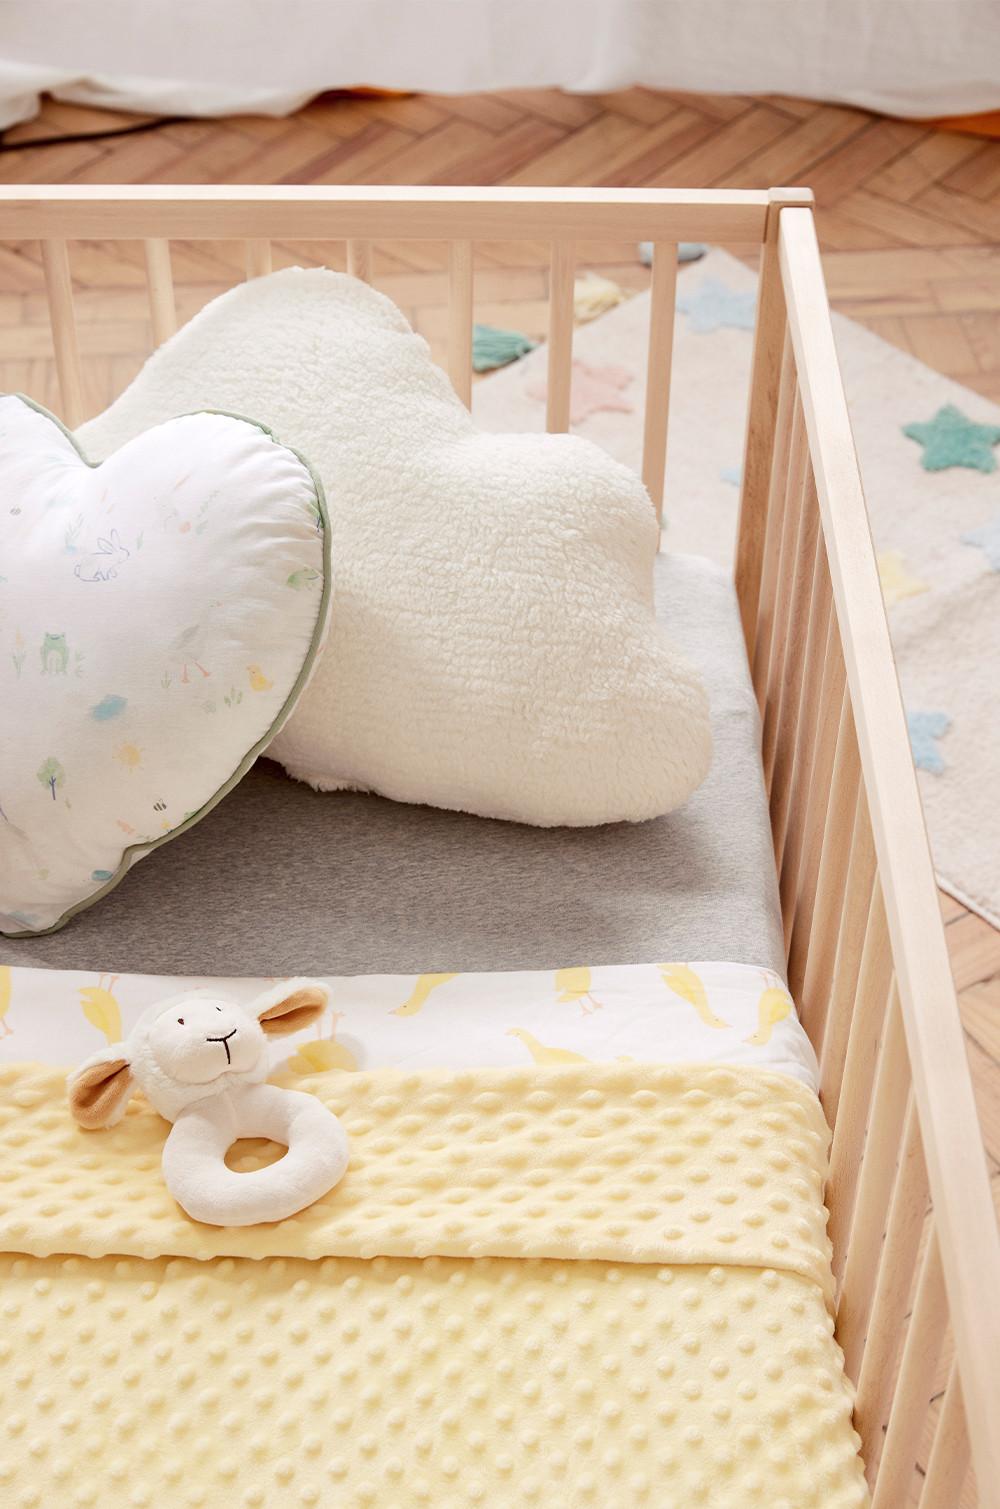 Baby crib set up with cot sheet, pillows and baby rattle